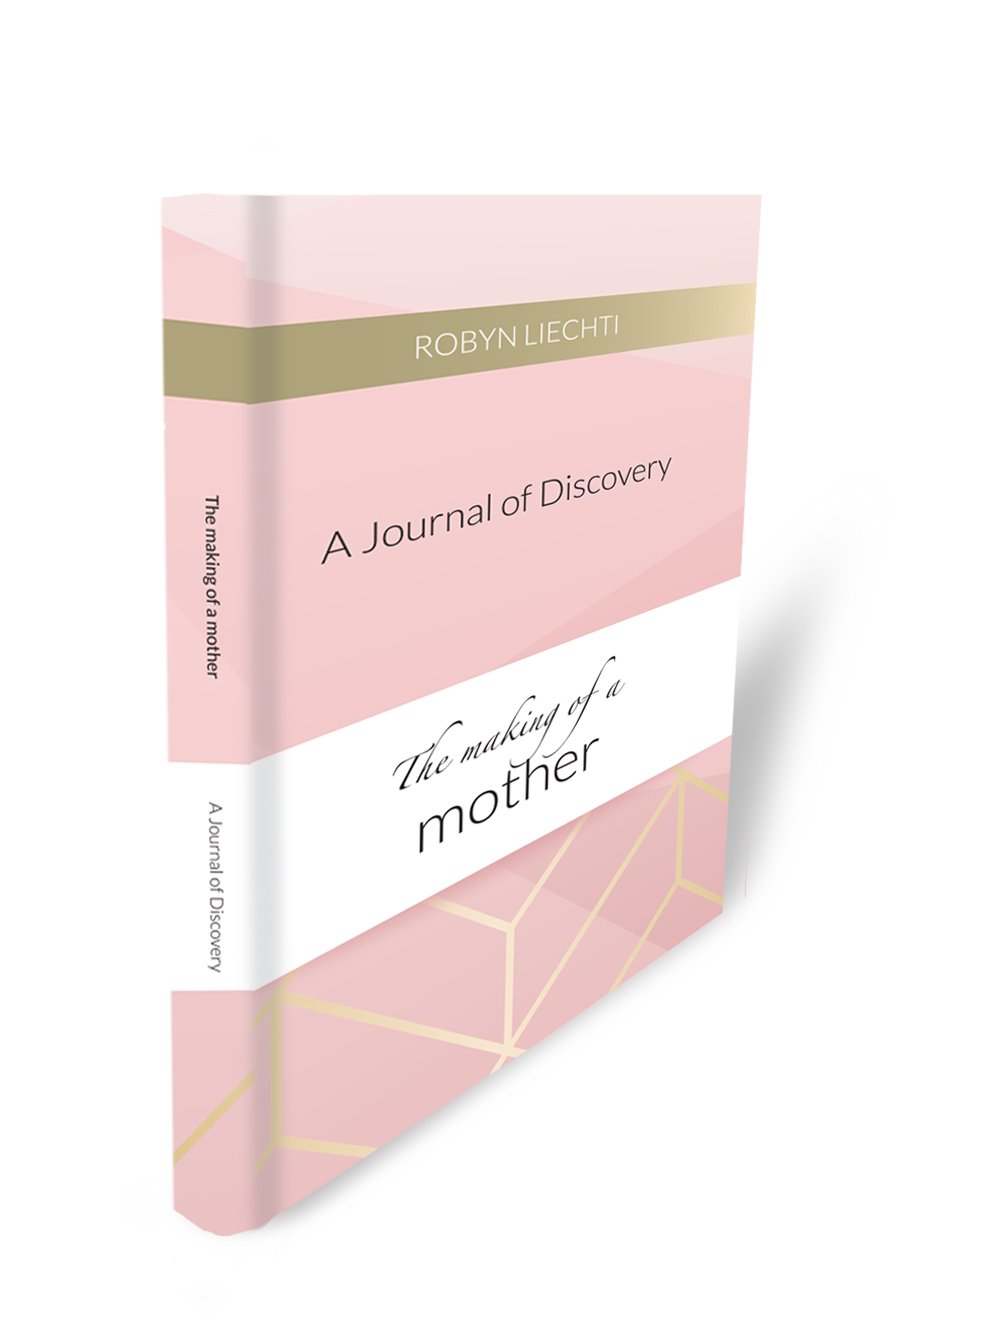 The making of a mother journal by robyn liechti